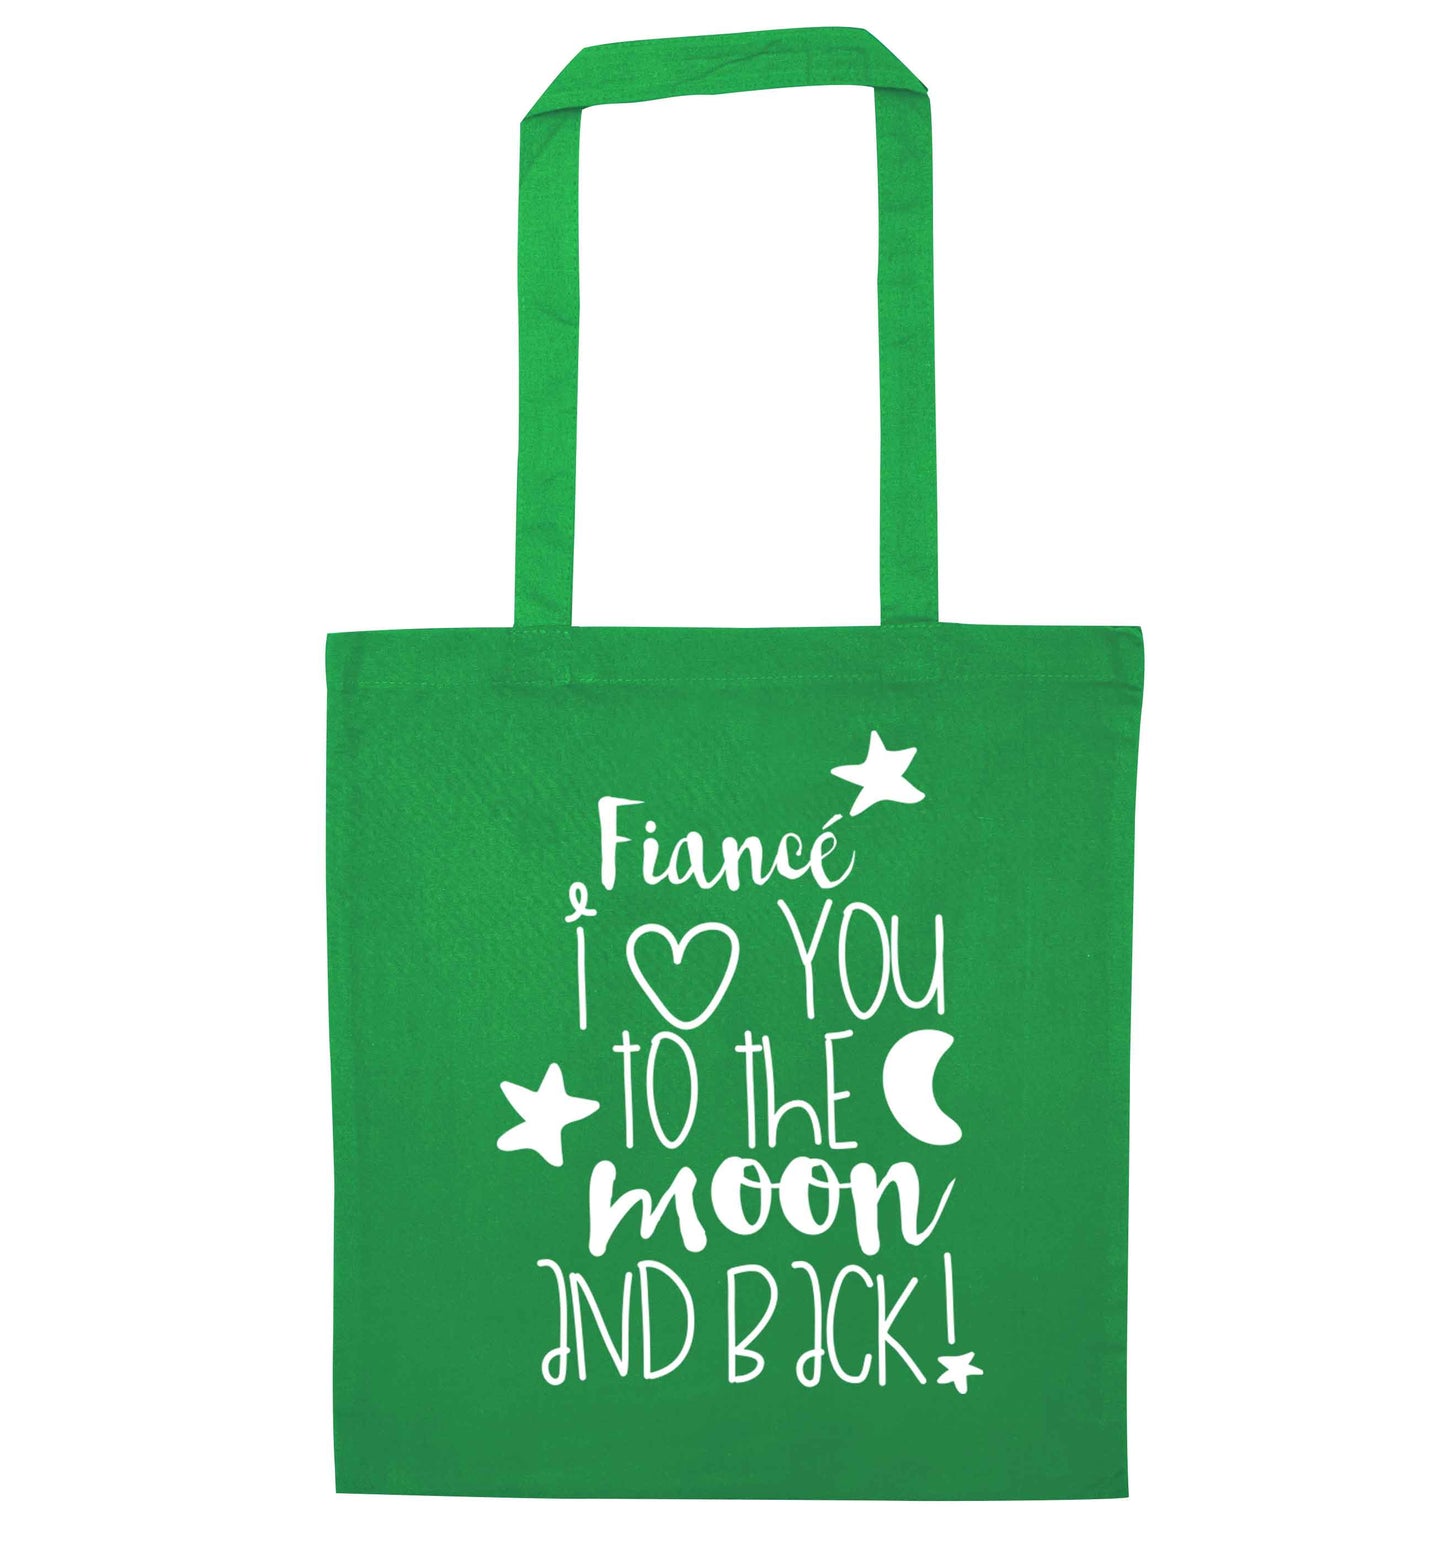 Fiancé I love you to the moon and back green tote bag